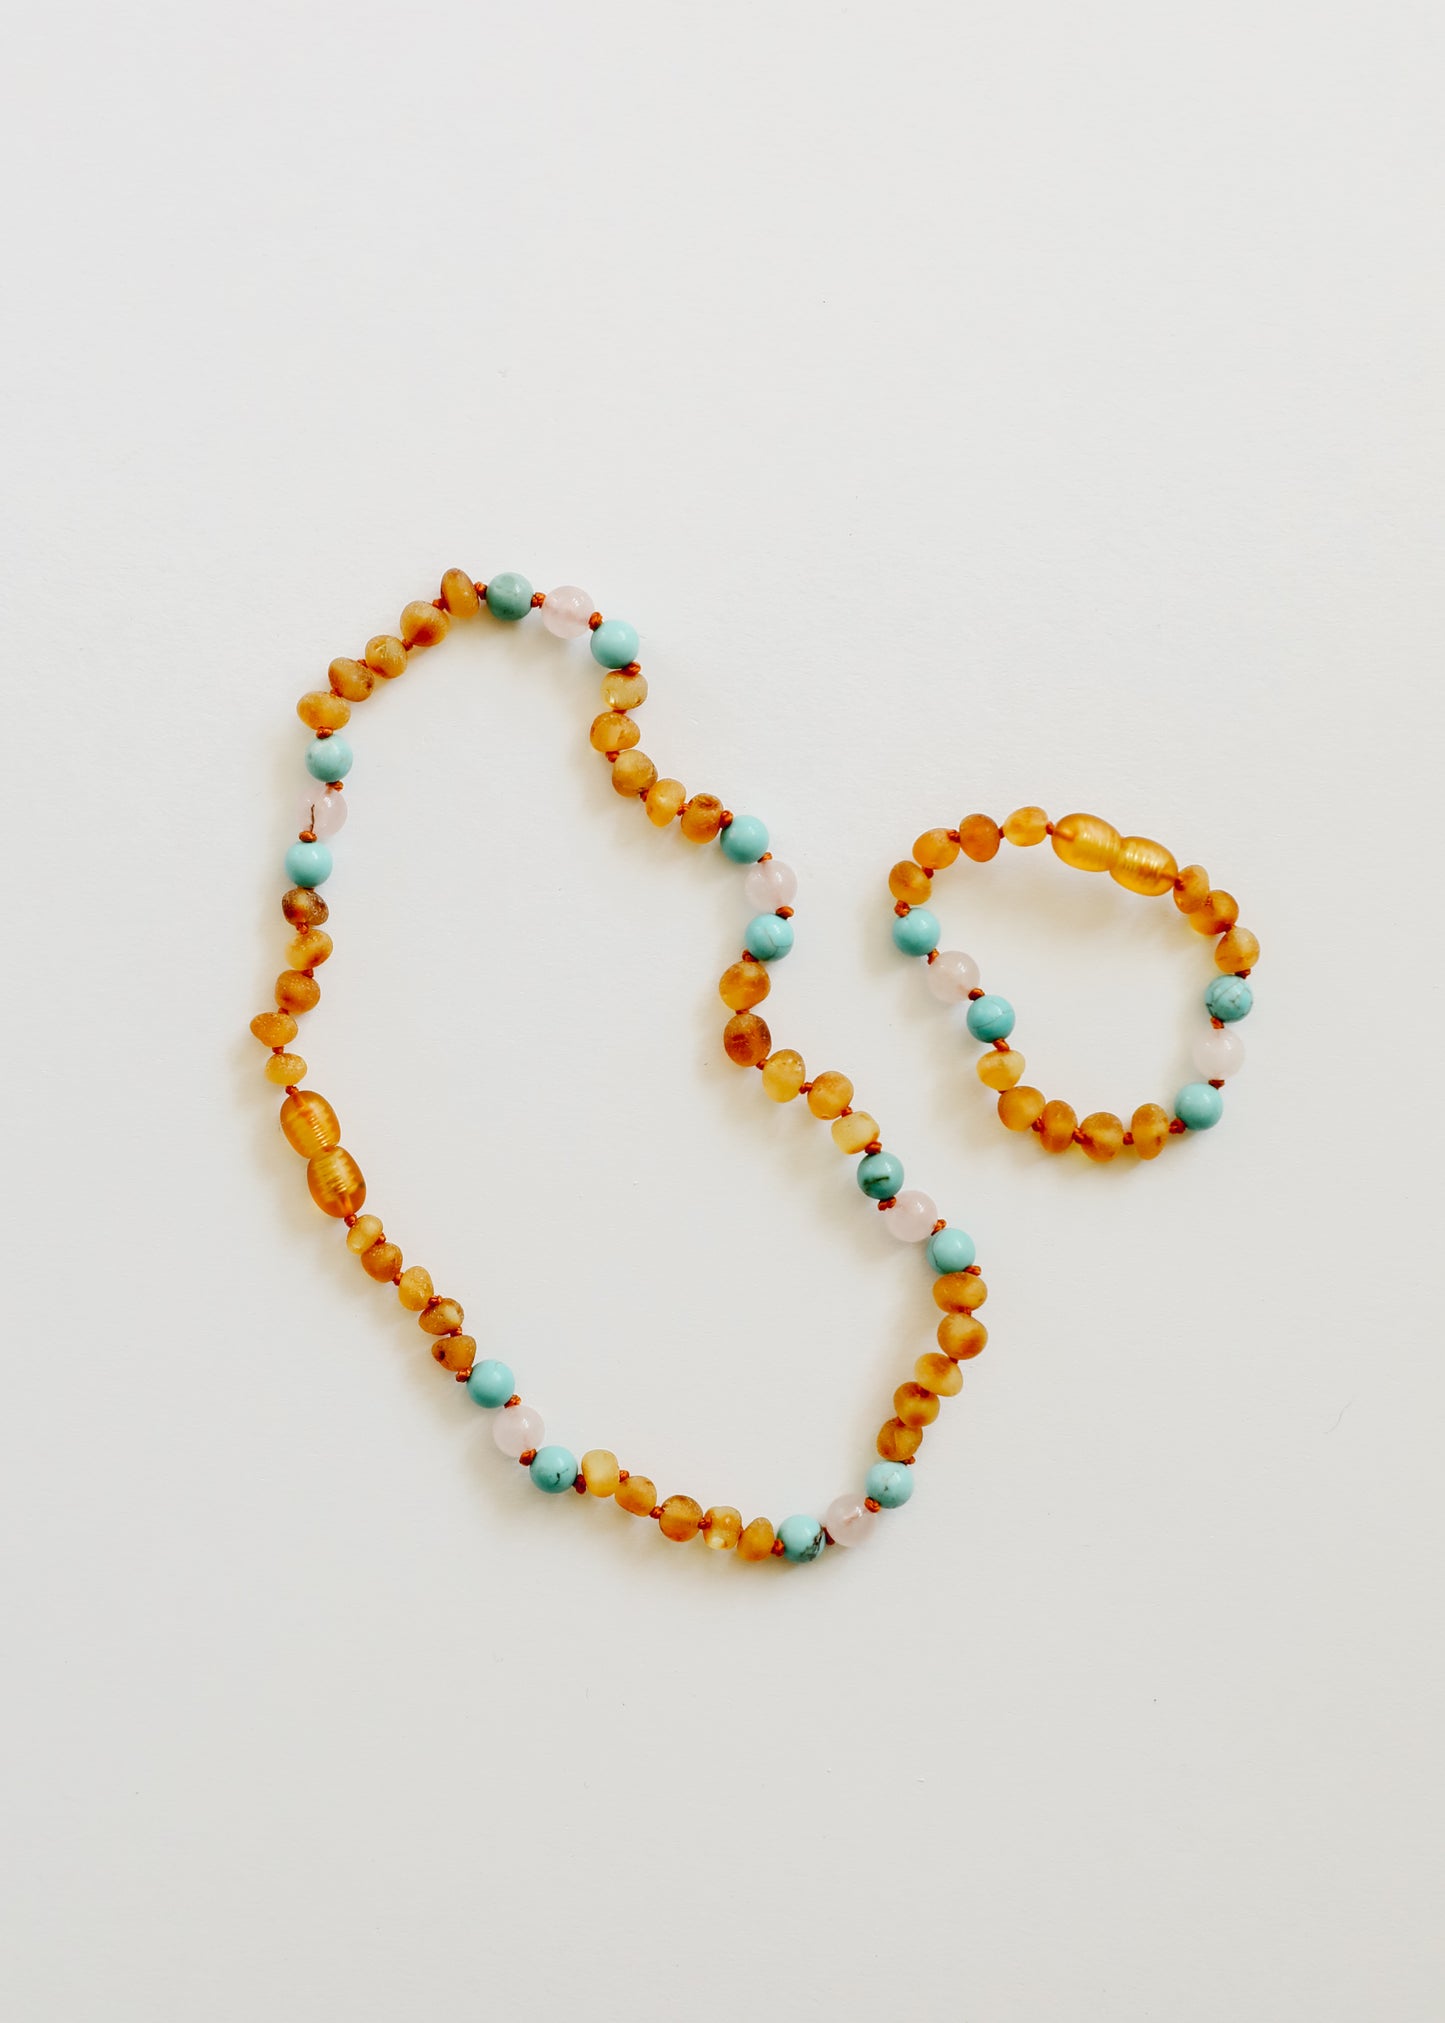 Raw Honey Baltic Amber and Natural Turquoise + Rose Quartz || Necklace